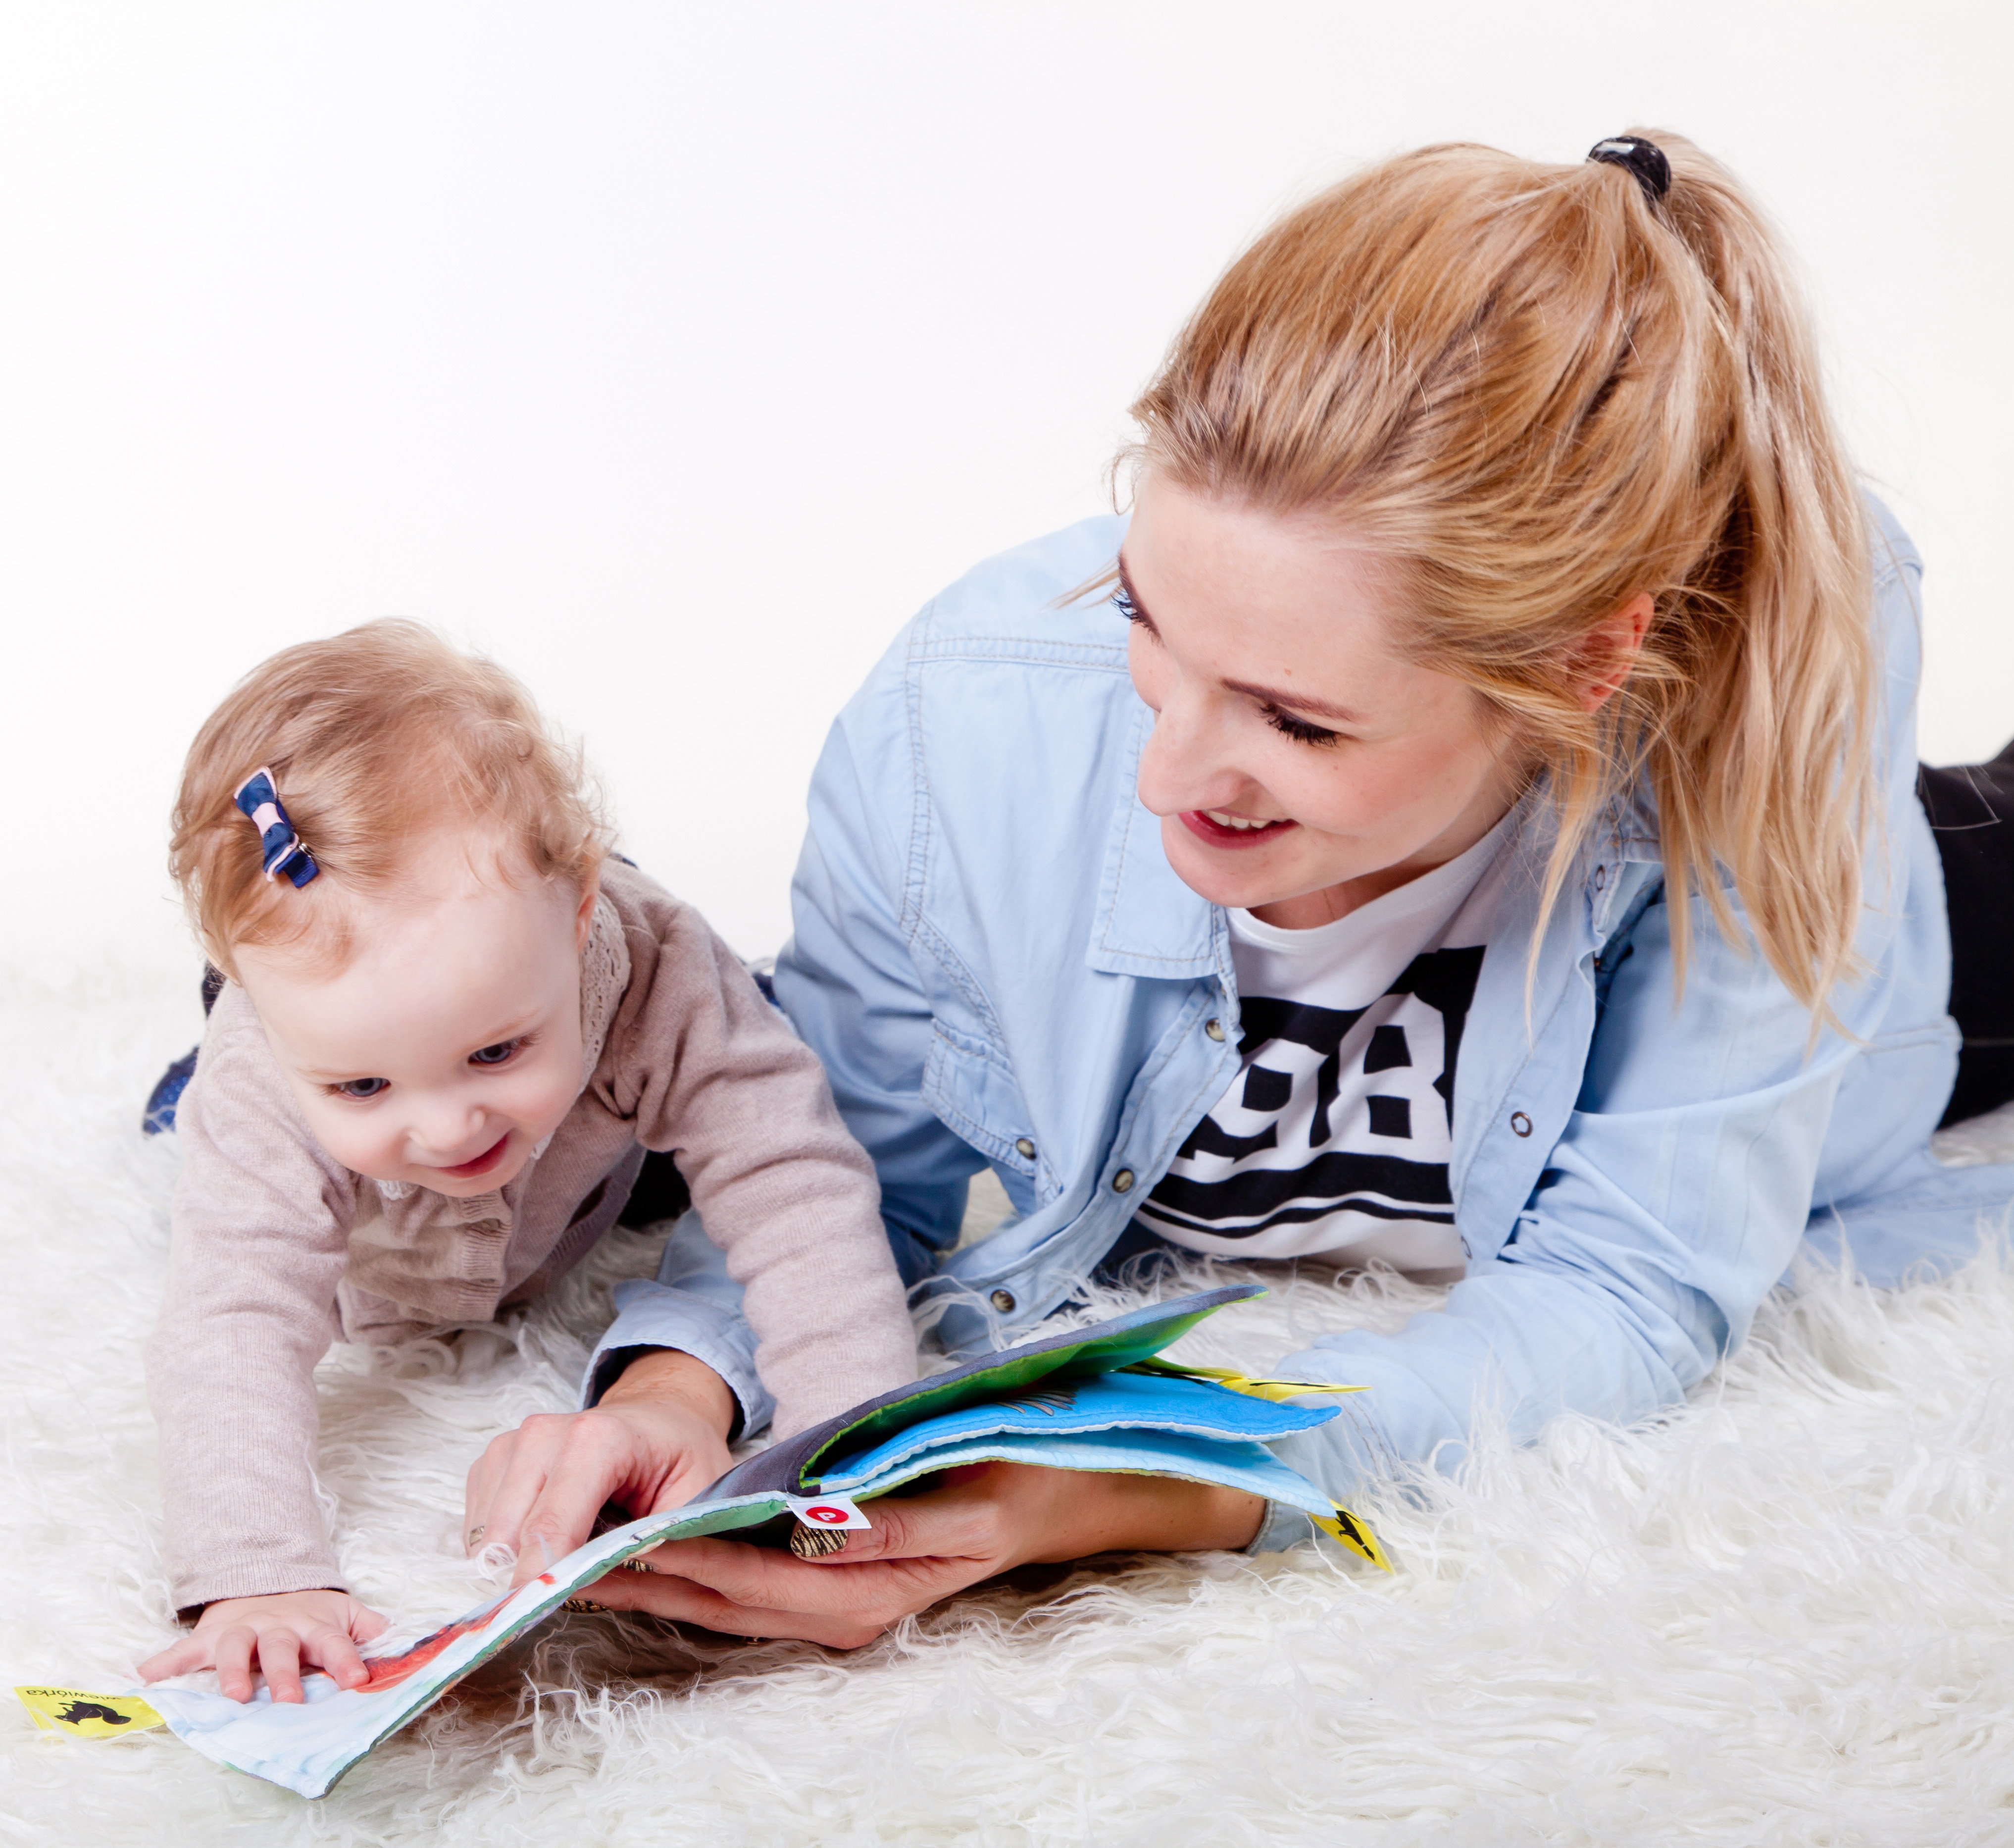 Image of mother and baby girl reading on a white carpet.